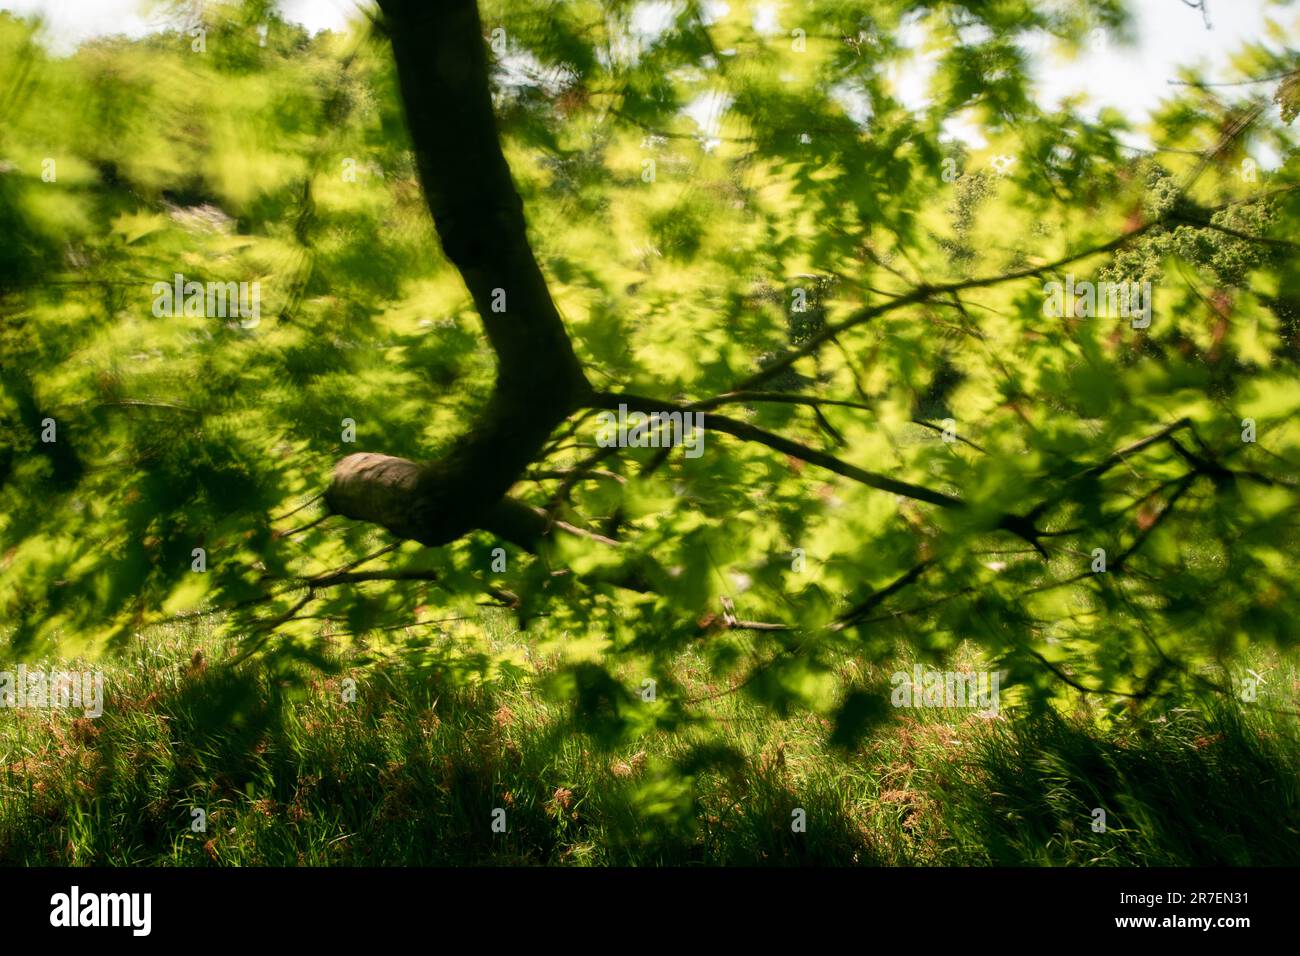 A branch of a tree in full leaf on Hampstead heath, London. A windy day, the bright green leaves are being blown about and are a blur Stock Photo